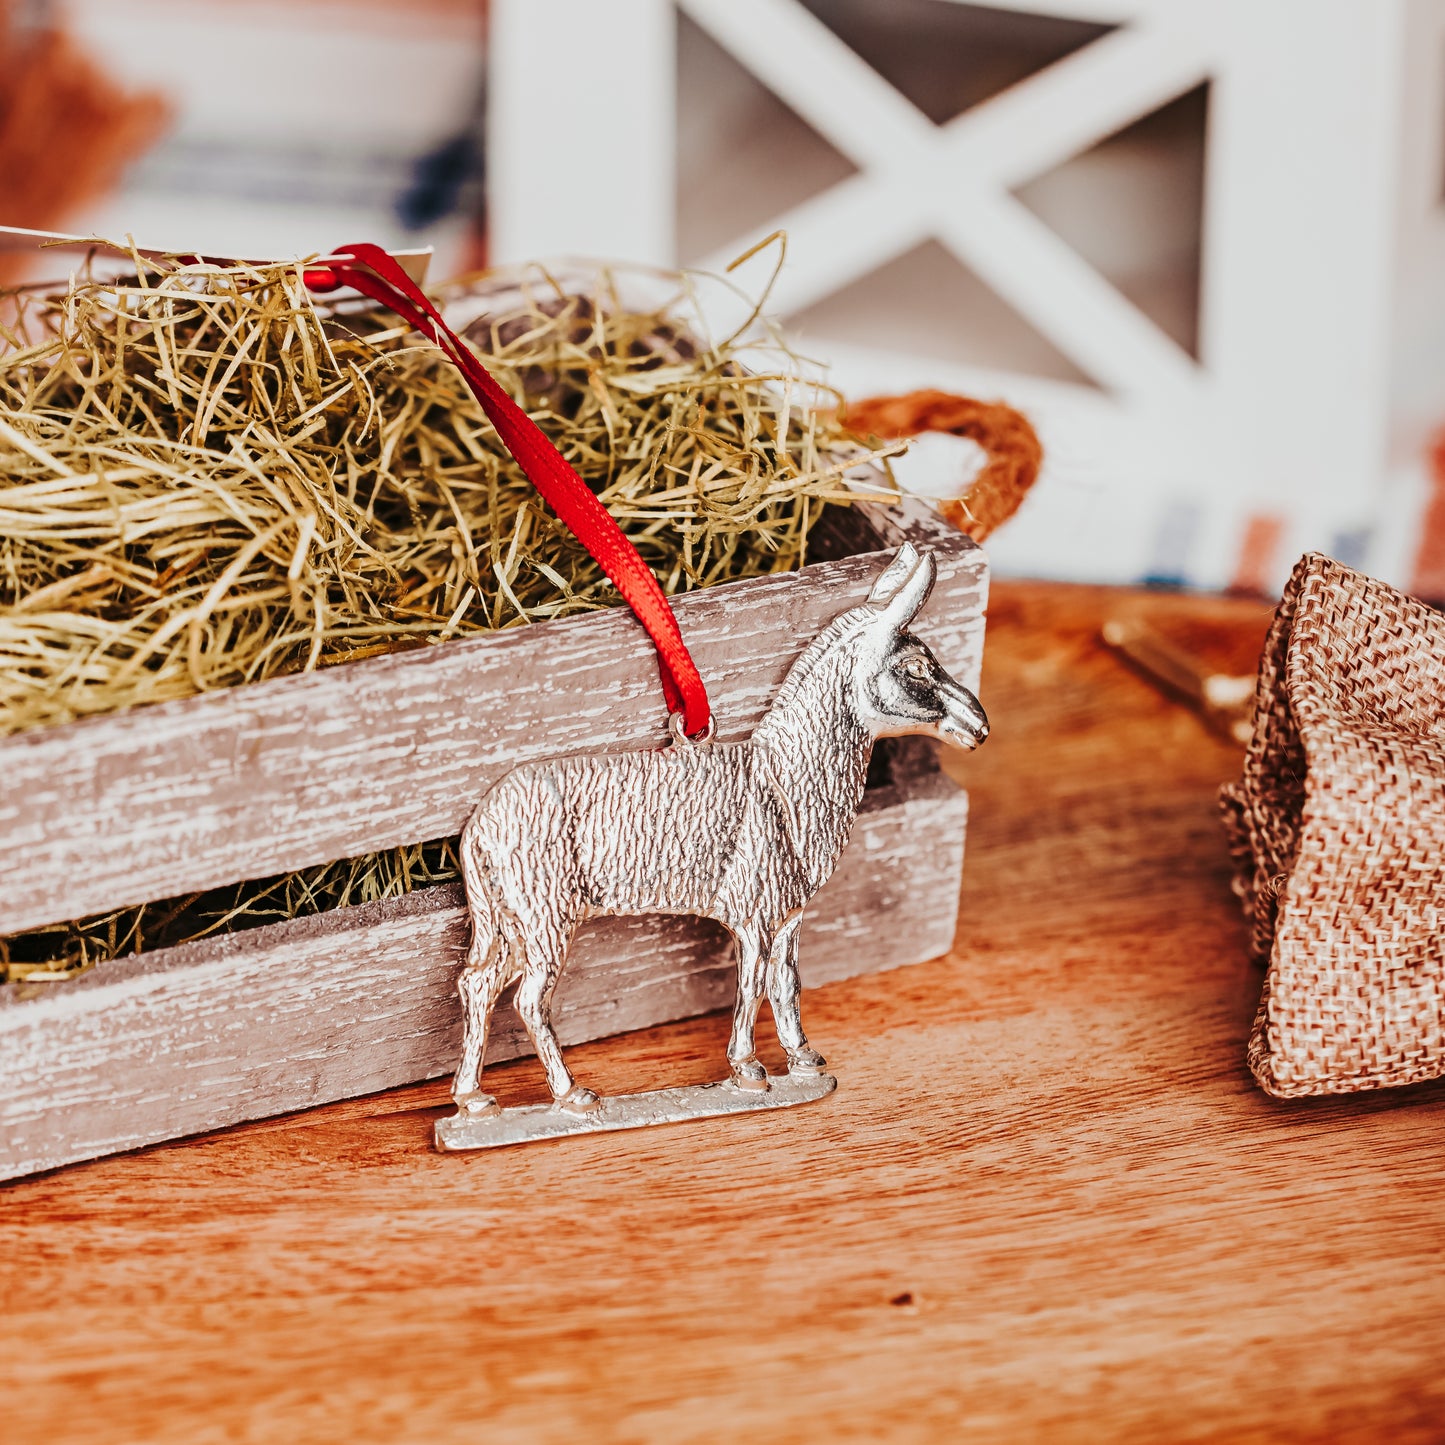 Farm Animal Gifts - Cow - Chicken - Horse - Goat - Sheep- Donkey - Ram - Rooster - Tractor - Individual Ornaments or Gift Set